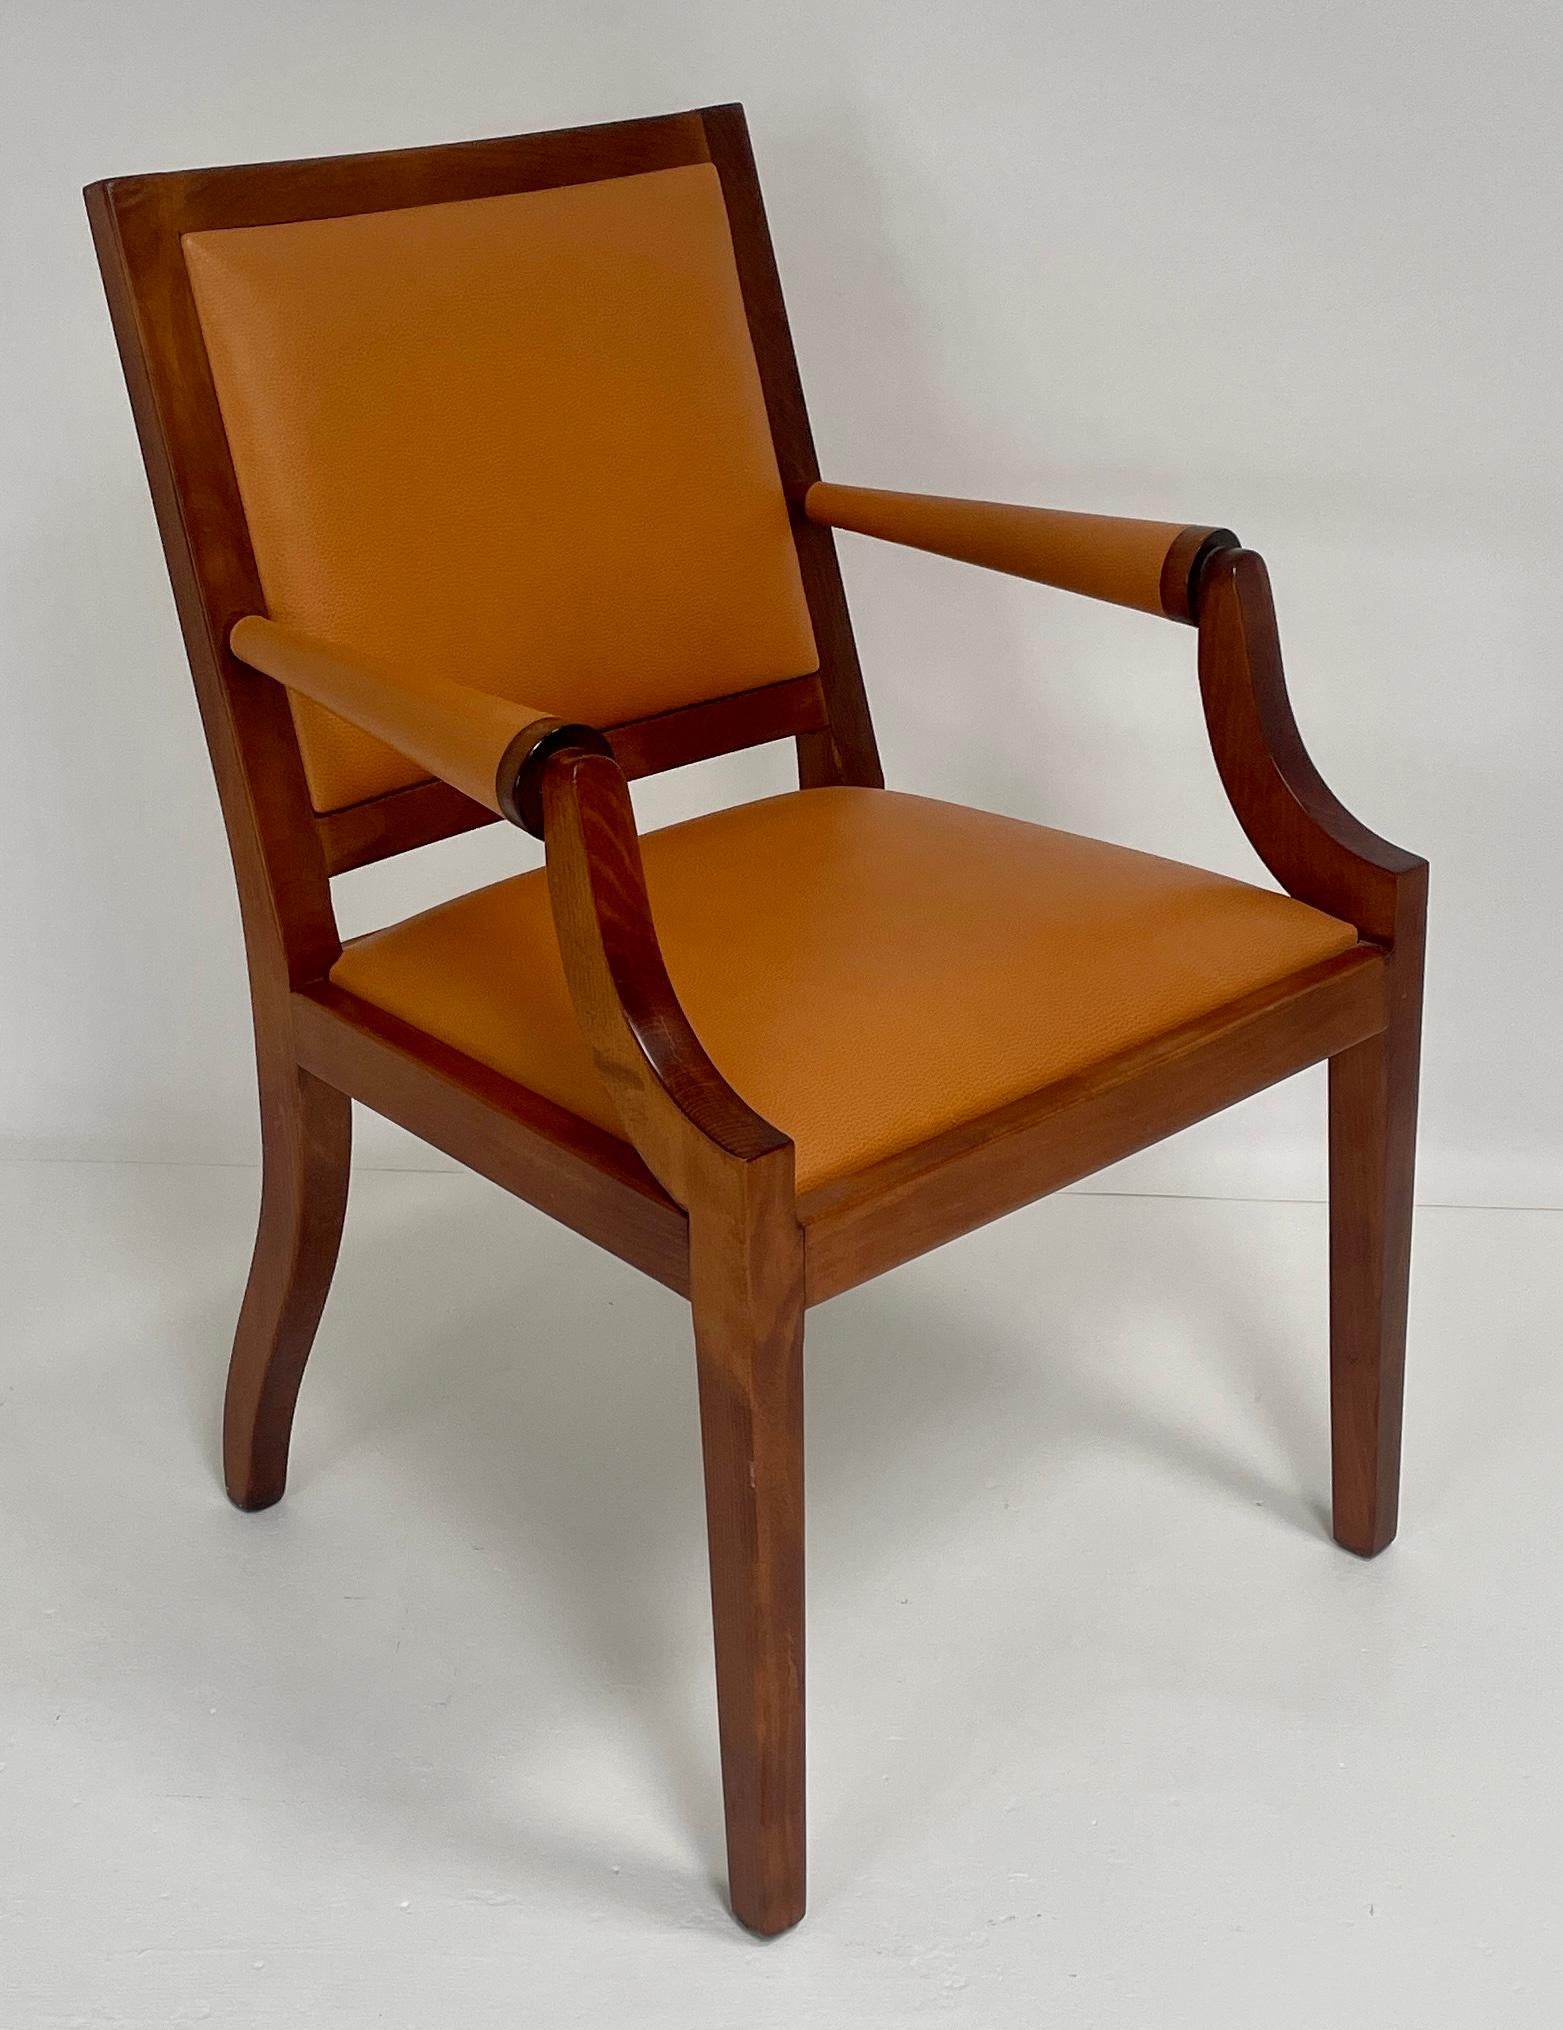 A stately arm chair. The curved lines of the alder frame have a cherry finish. The Hermes orange color leather cushions complement the finish of the frame. The details of the stitching and elegant lines create a classic comfortable arm chair.